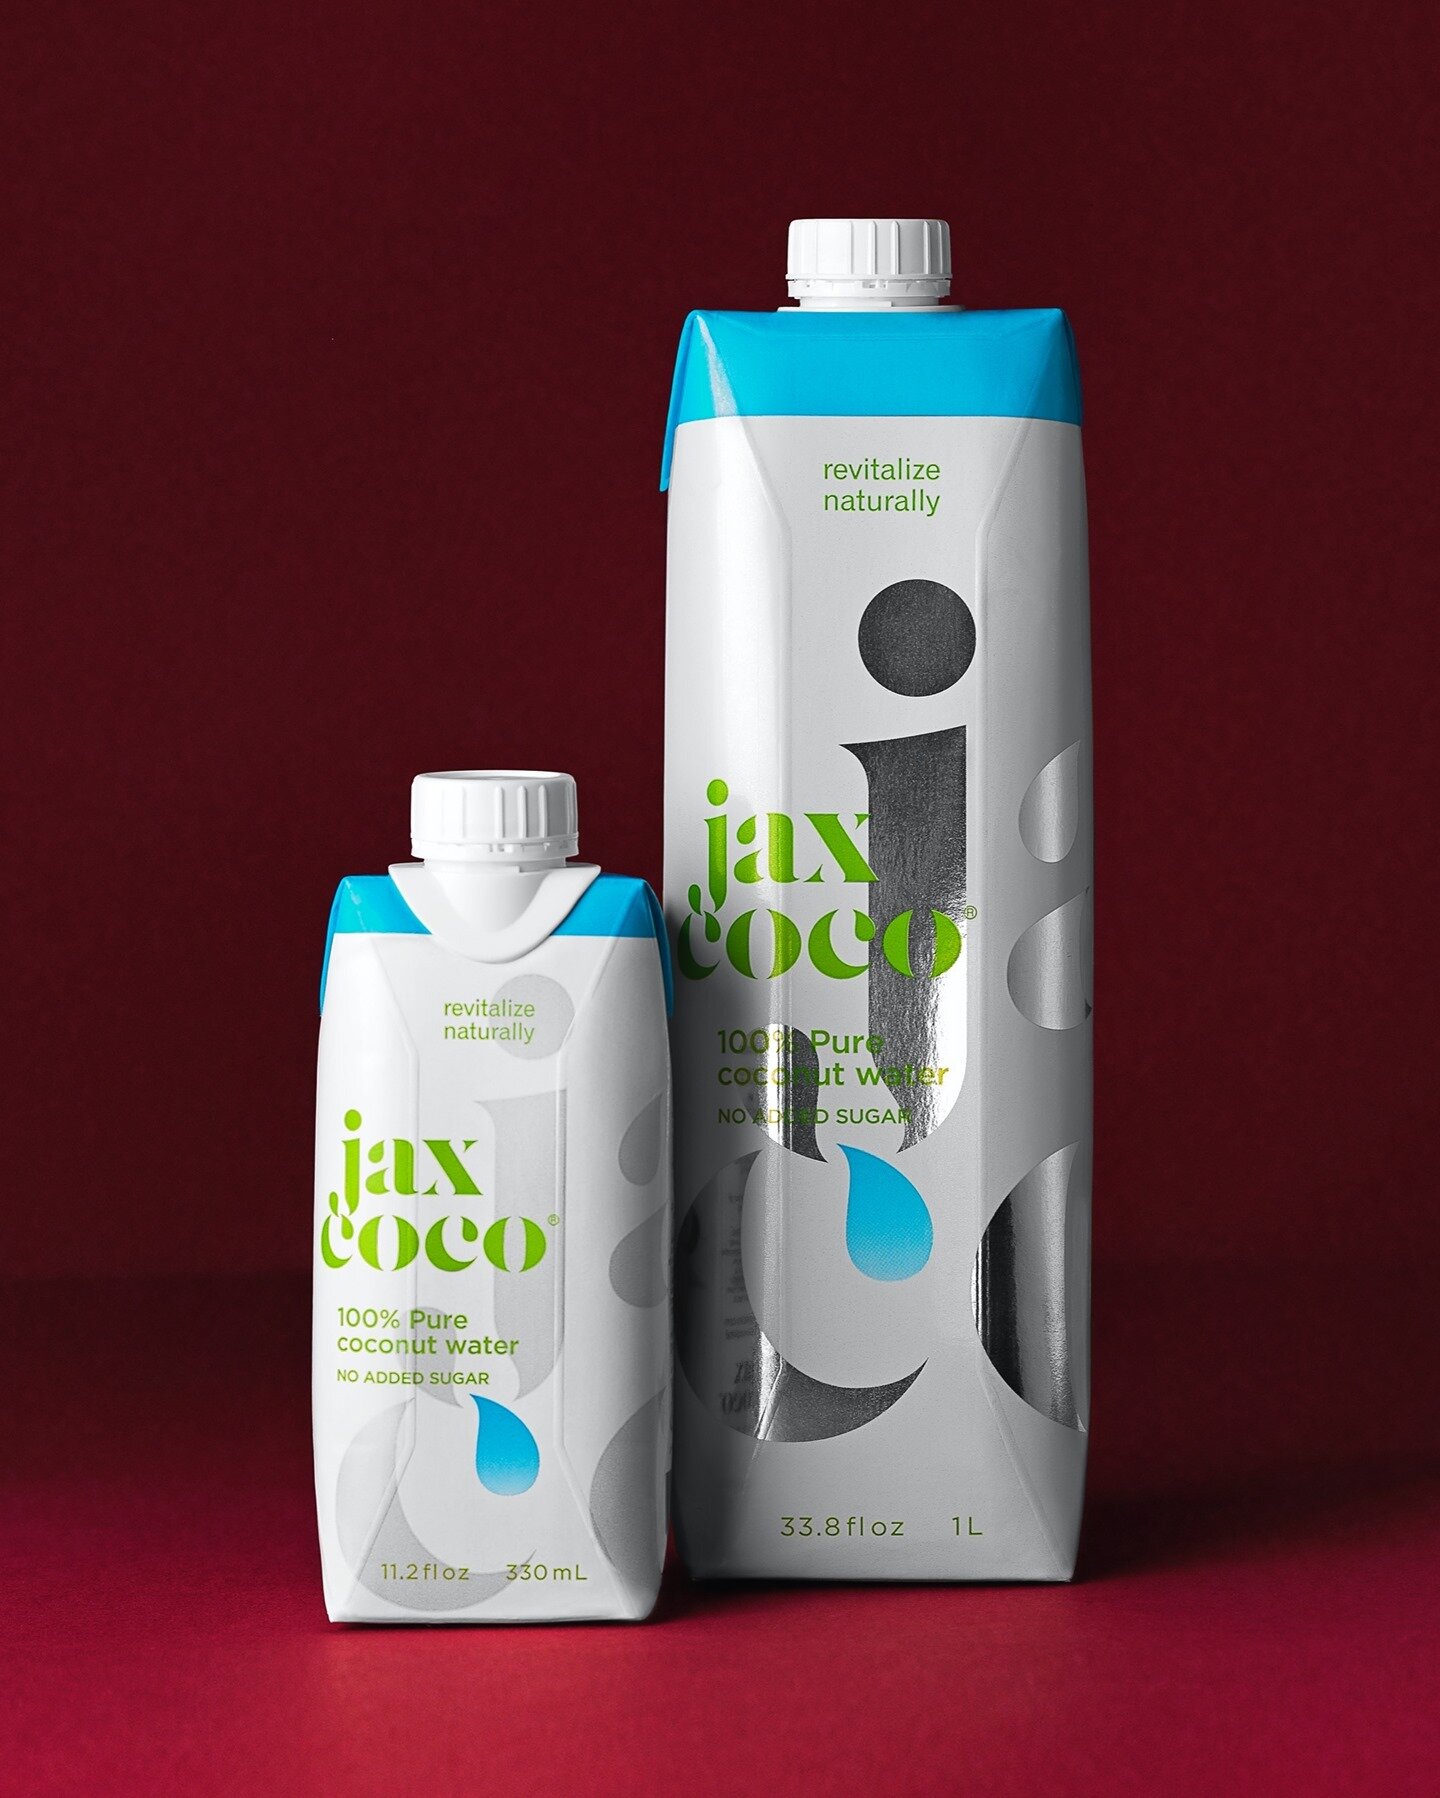 Morning, Noon and Night. ⁠
⁠
Add Jax Coco to your morning smoothie, lunchtime meal or even a cheeky evening cocktail. For a natural good for life compliment. There by your side all day long!⁠
⁠
#jaxcoco #coconutwater #goodforlife